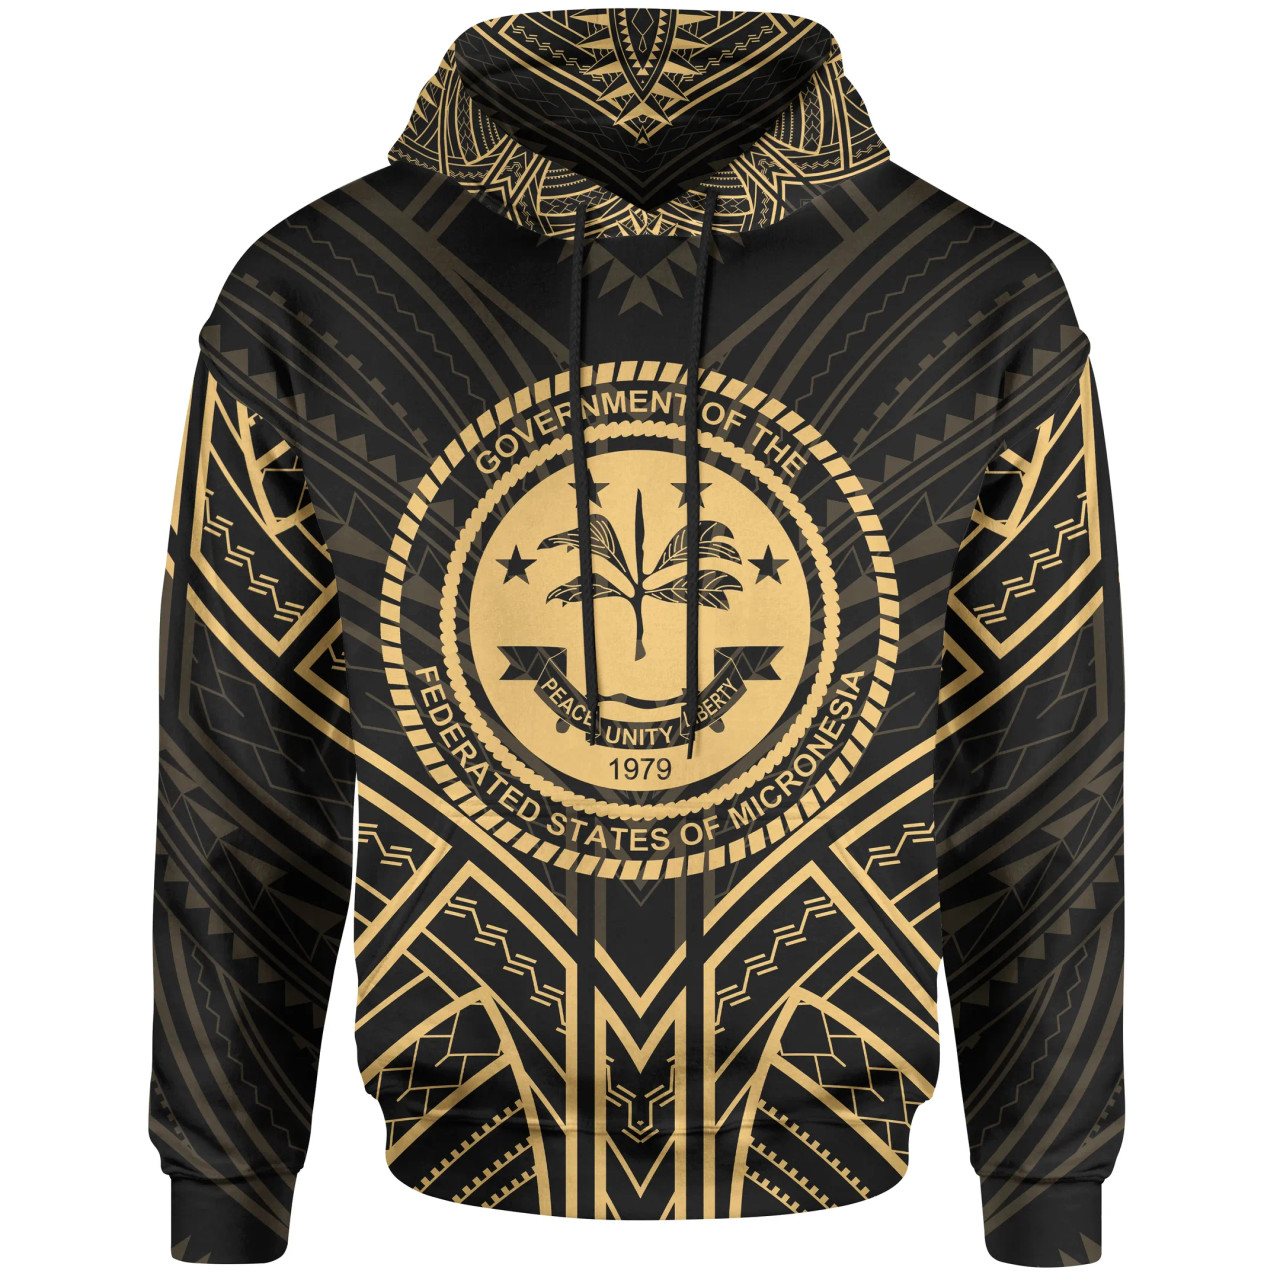 Federated States of Micronesia Hoodie - Federated States of Micronesia Seal Gold Tribal Patterns